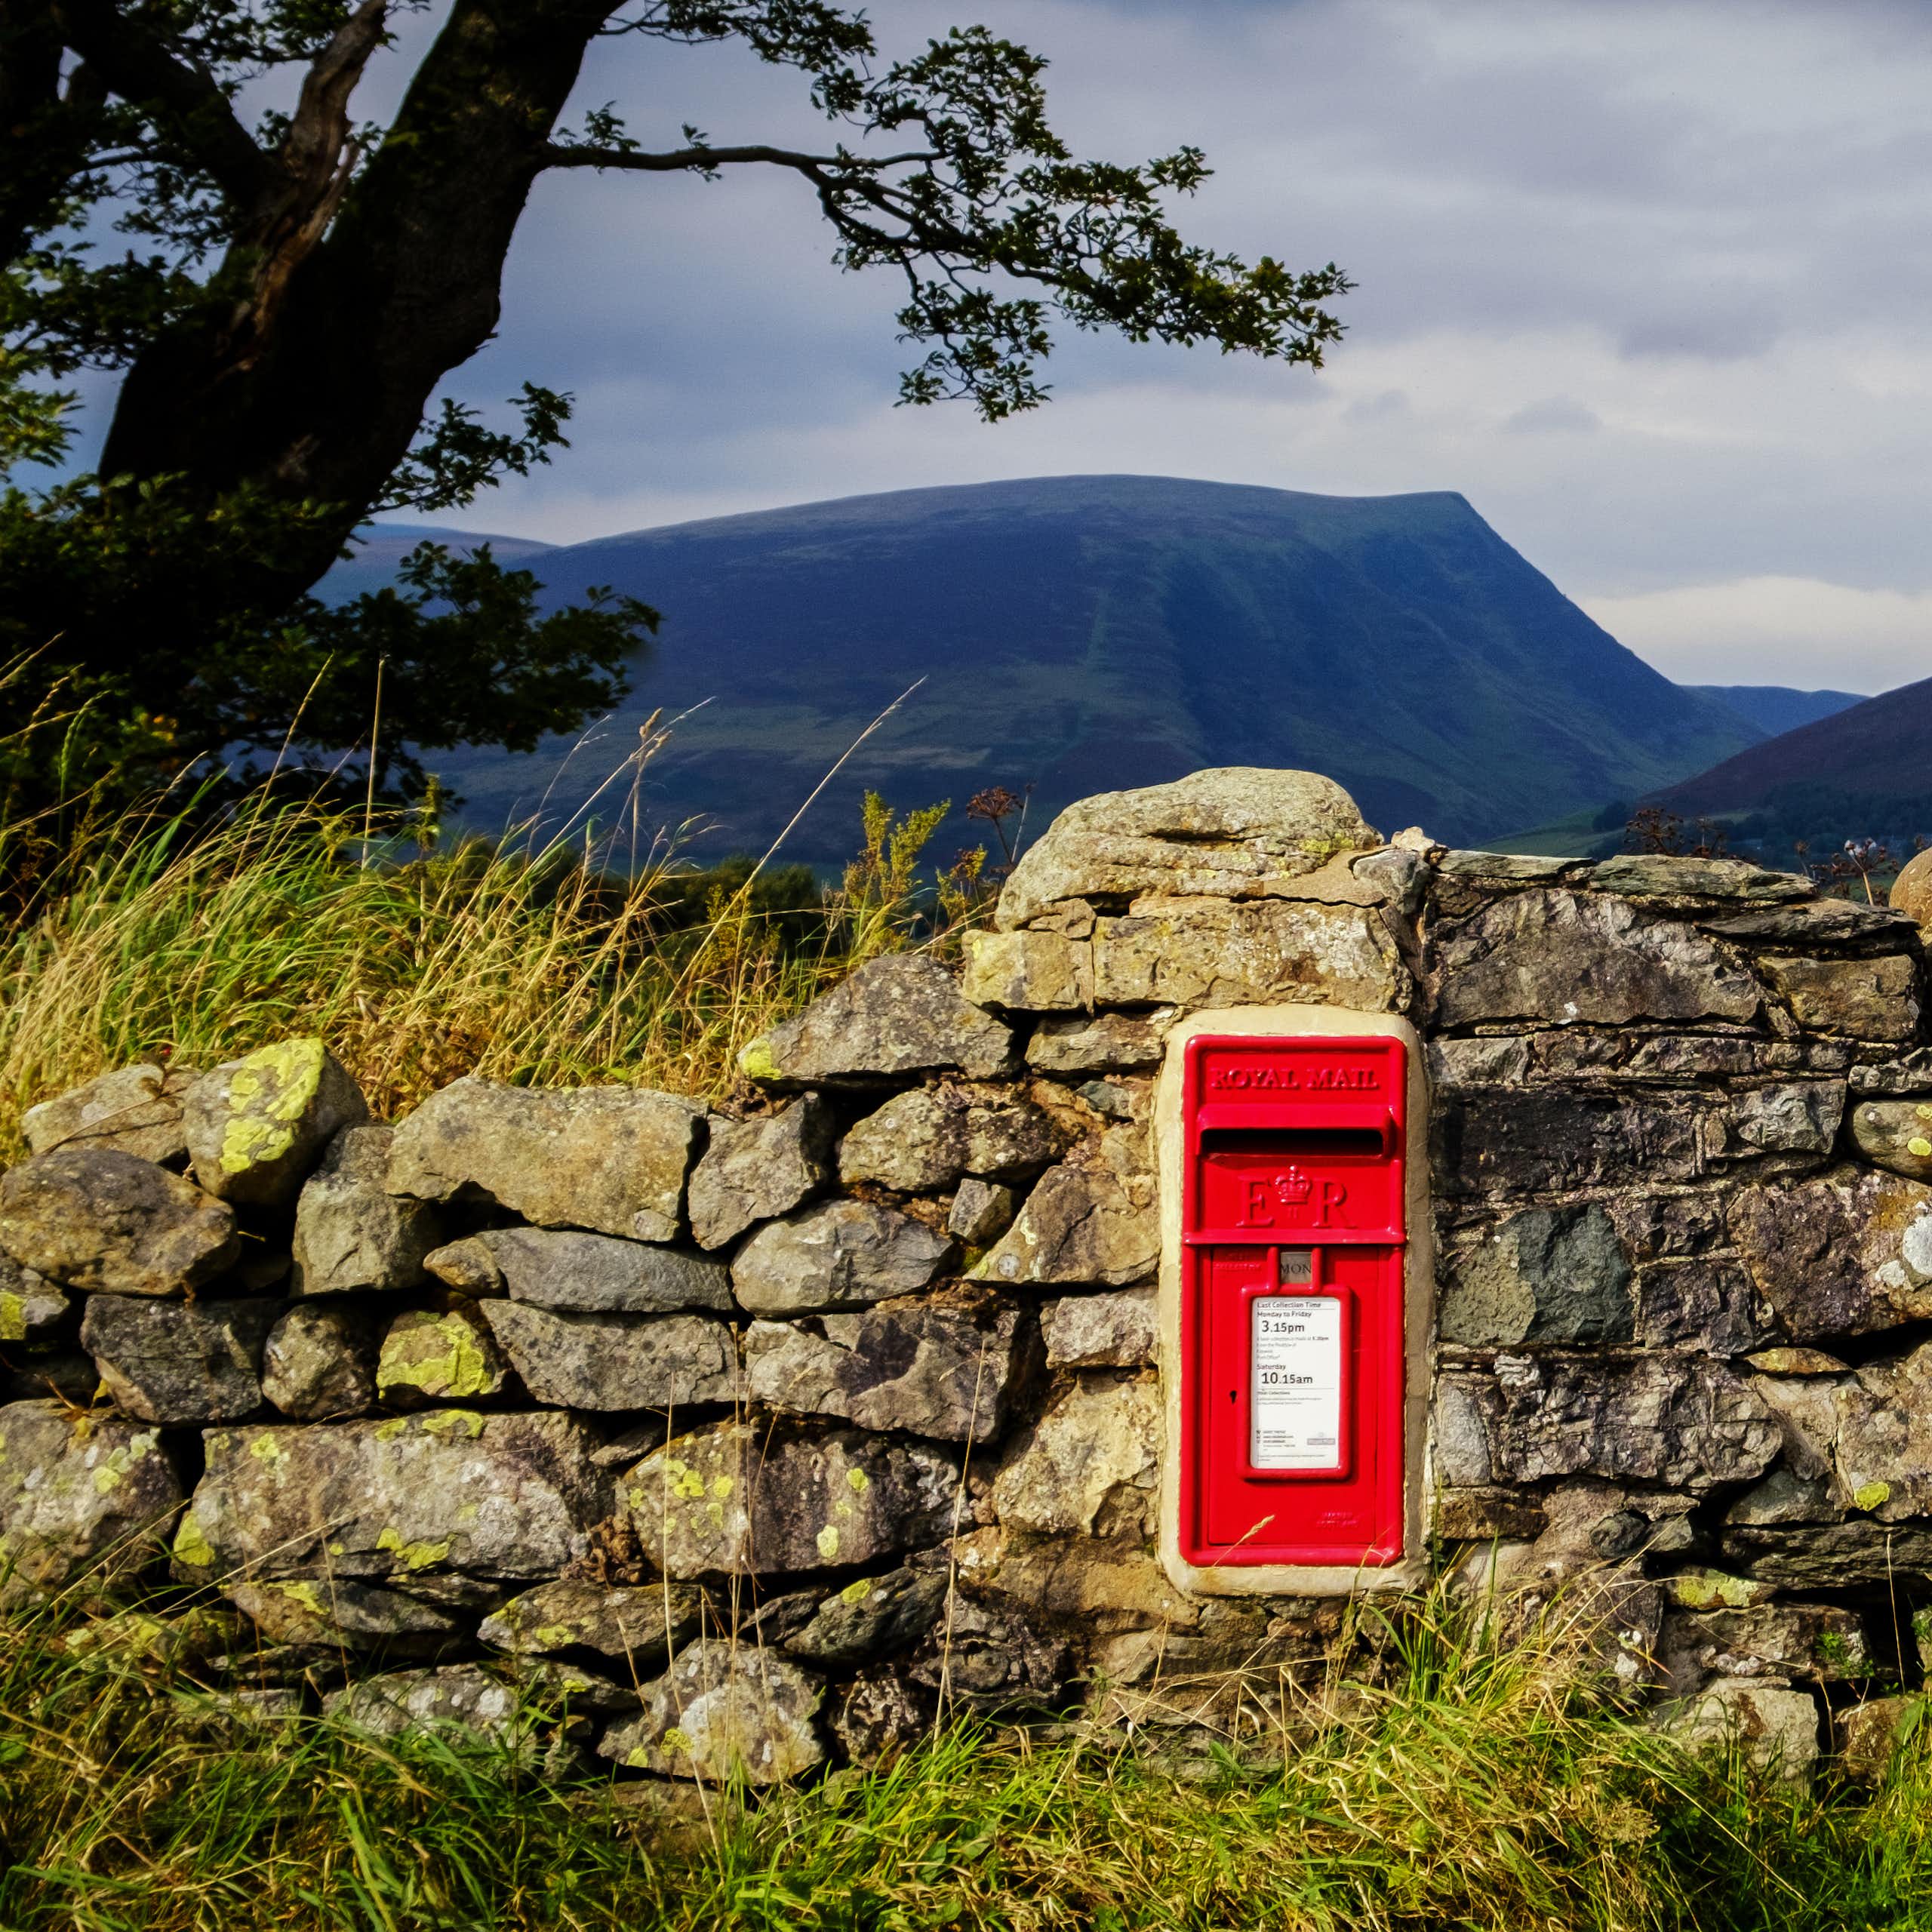 Post box in stone wall with rural backdrop.